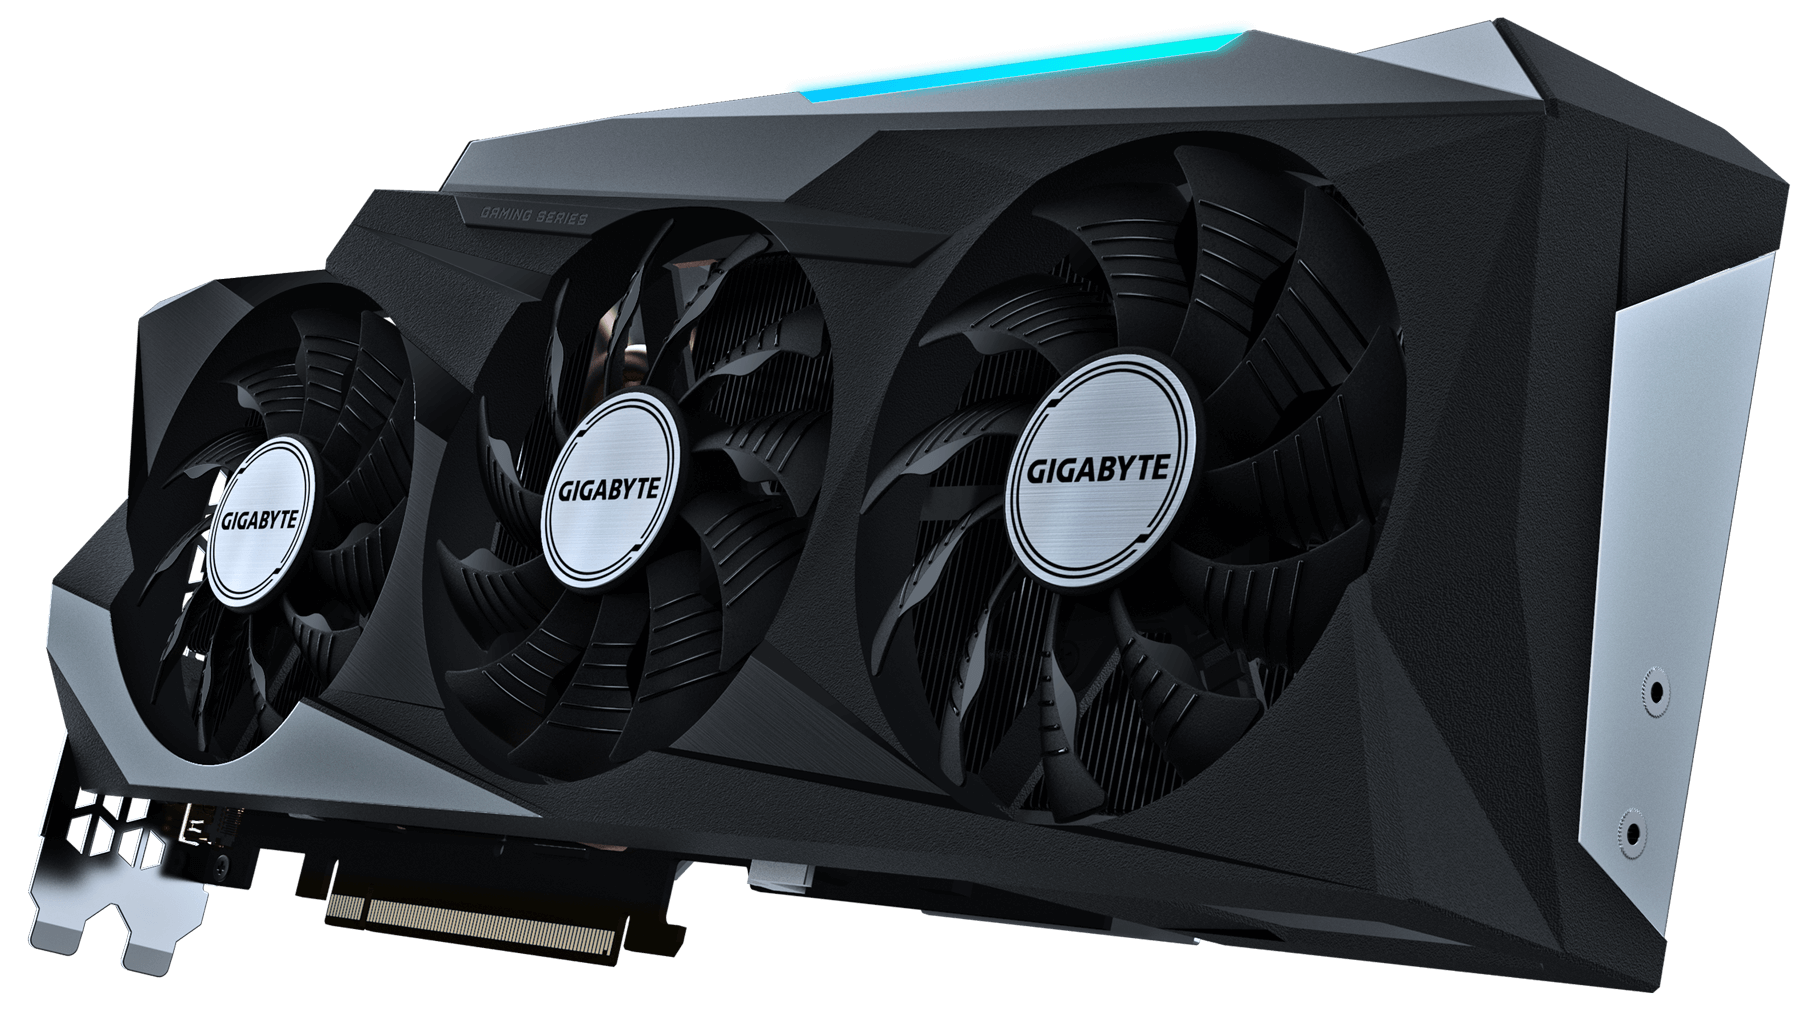 Geforce Rtx 3080 Gaming Oc 10g Key Features Graphics Card Gigabyte Global